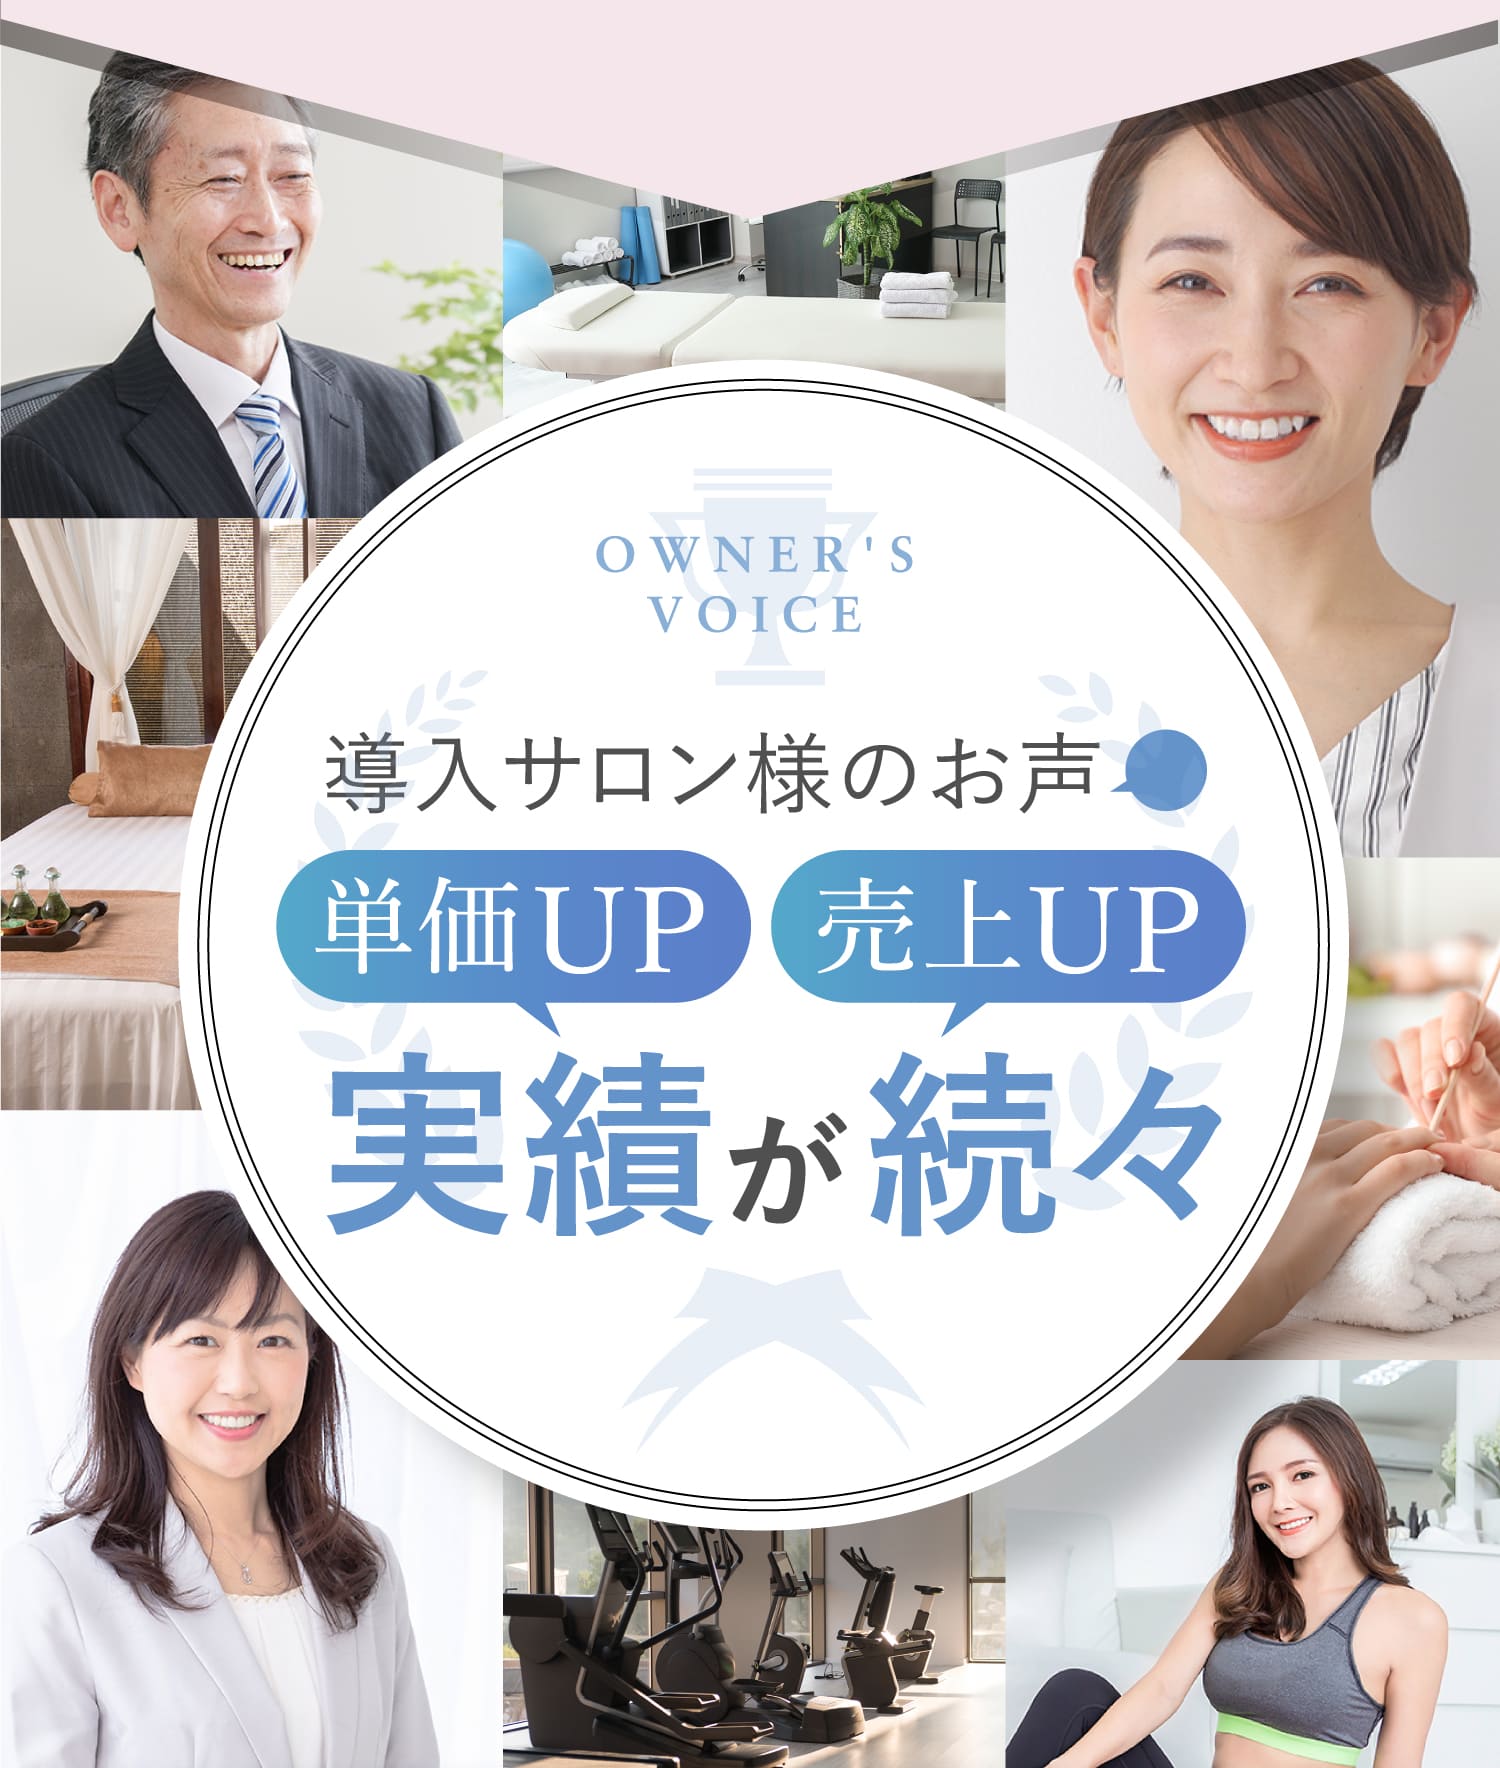 OWNER'S VOICE 導入サロン様のお声 単価UP 売上UP 実績が続々